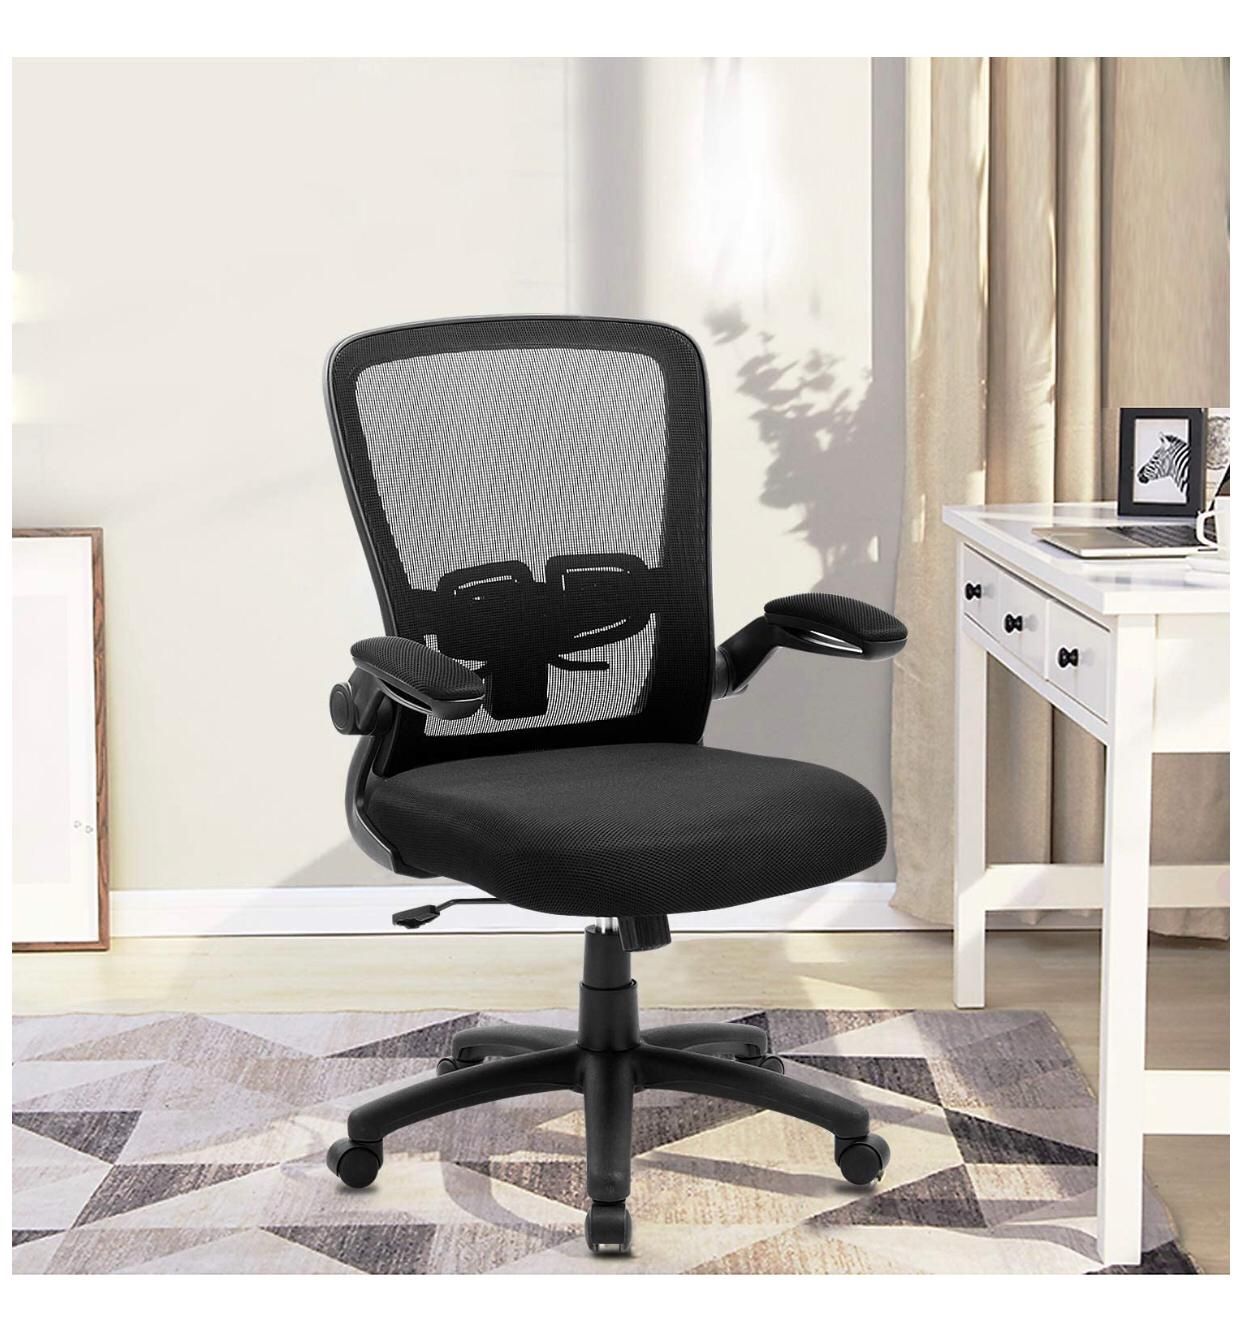 Office Chair, ZLHECTO Ergonomic Desk Chair with Adjustable Height